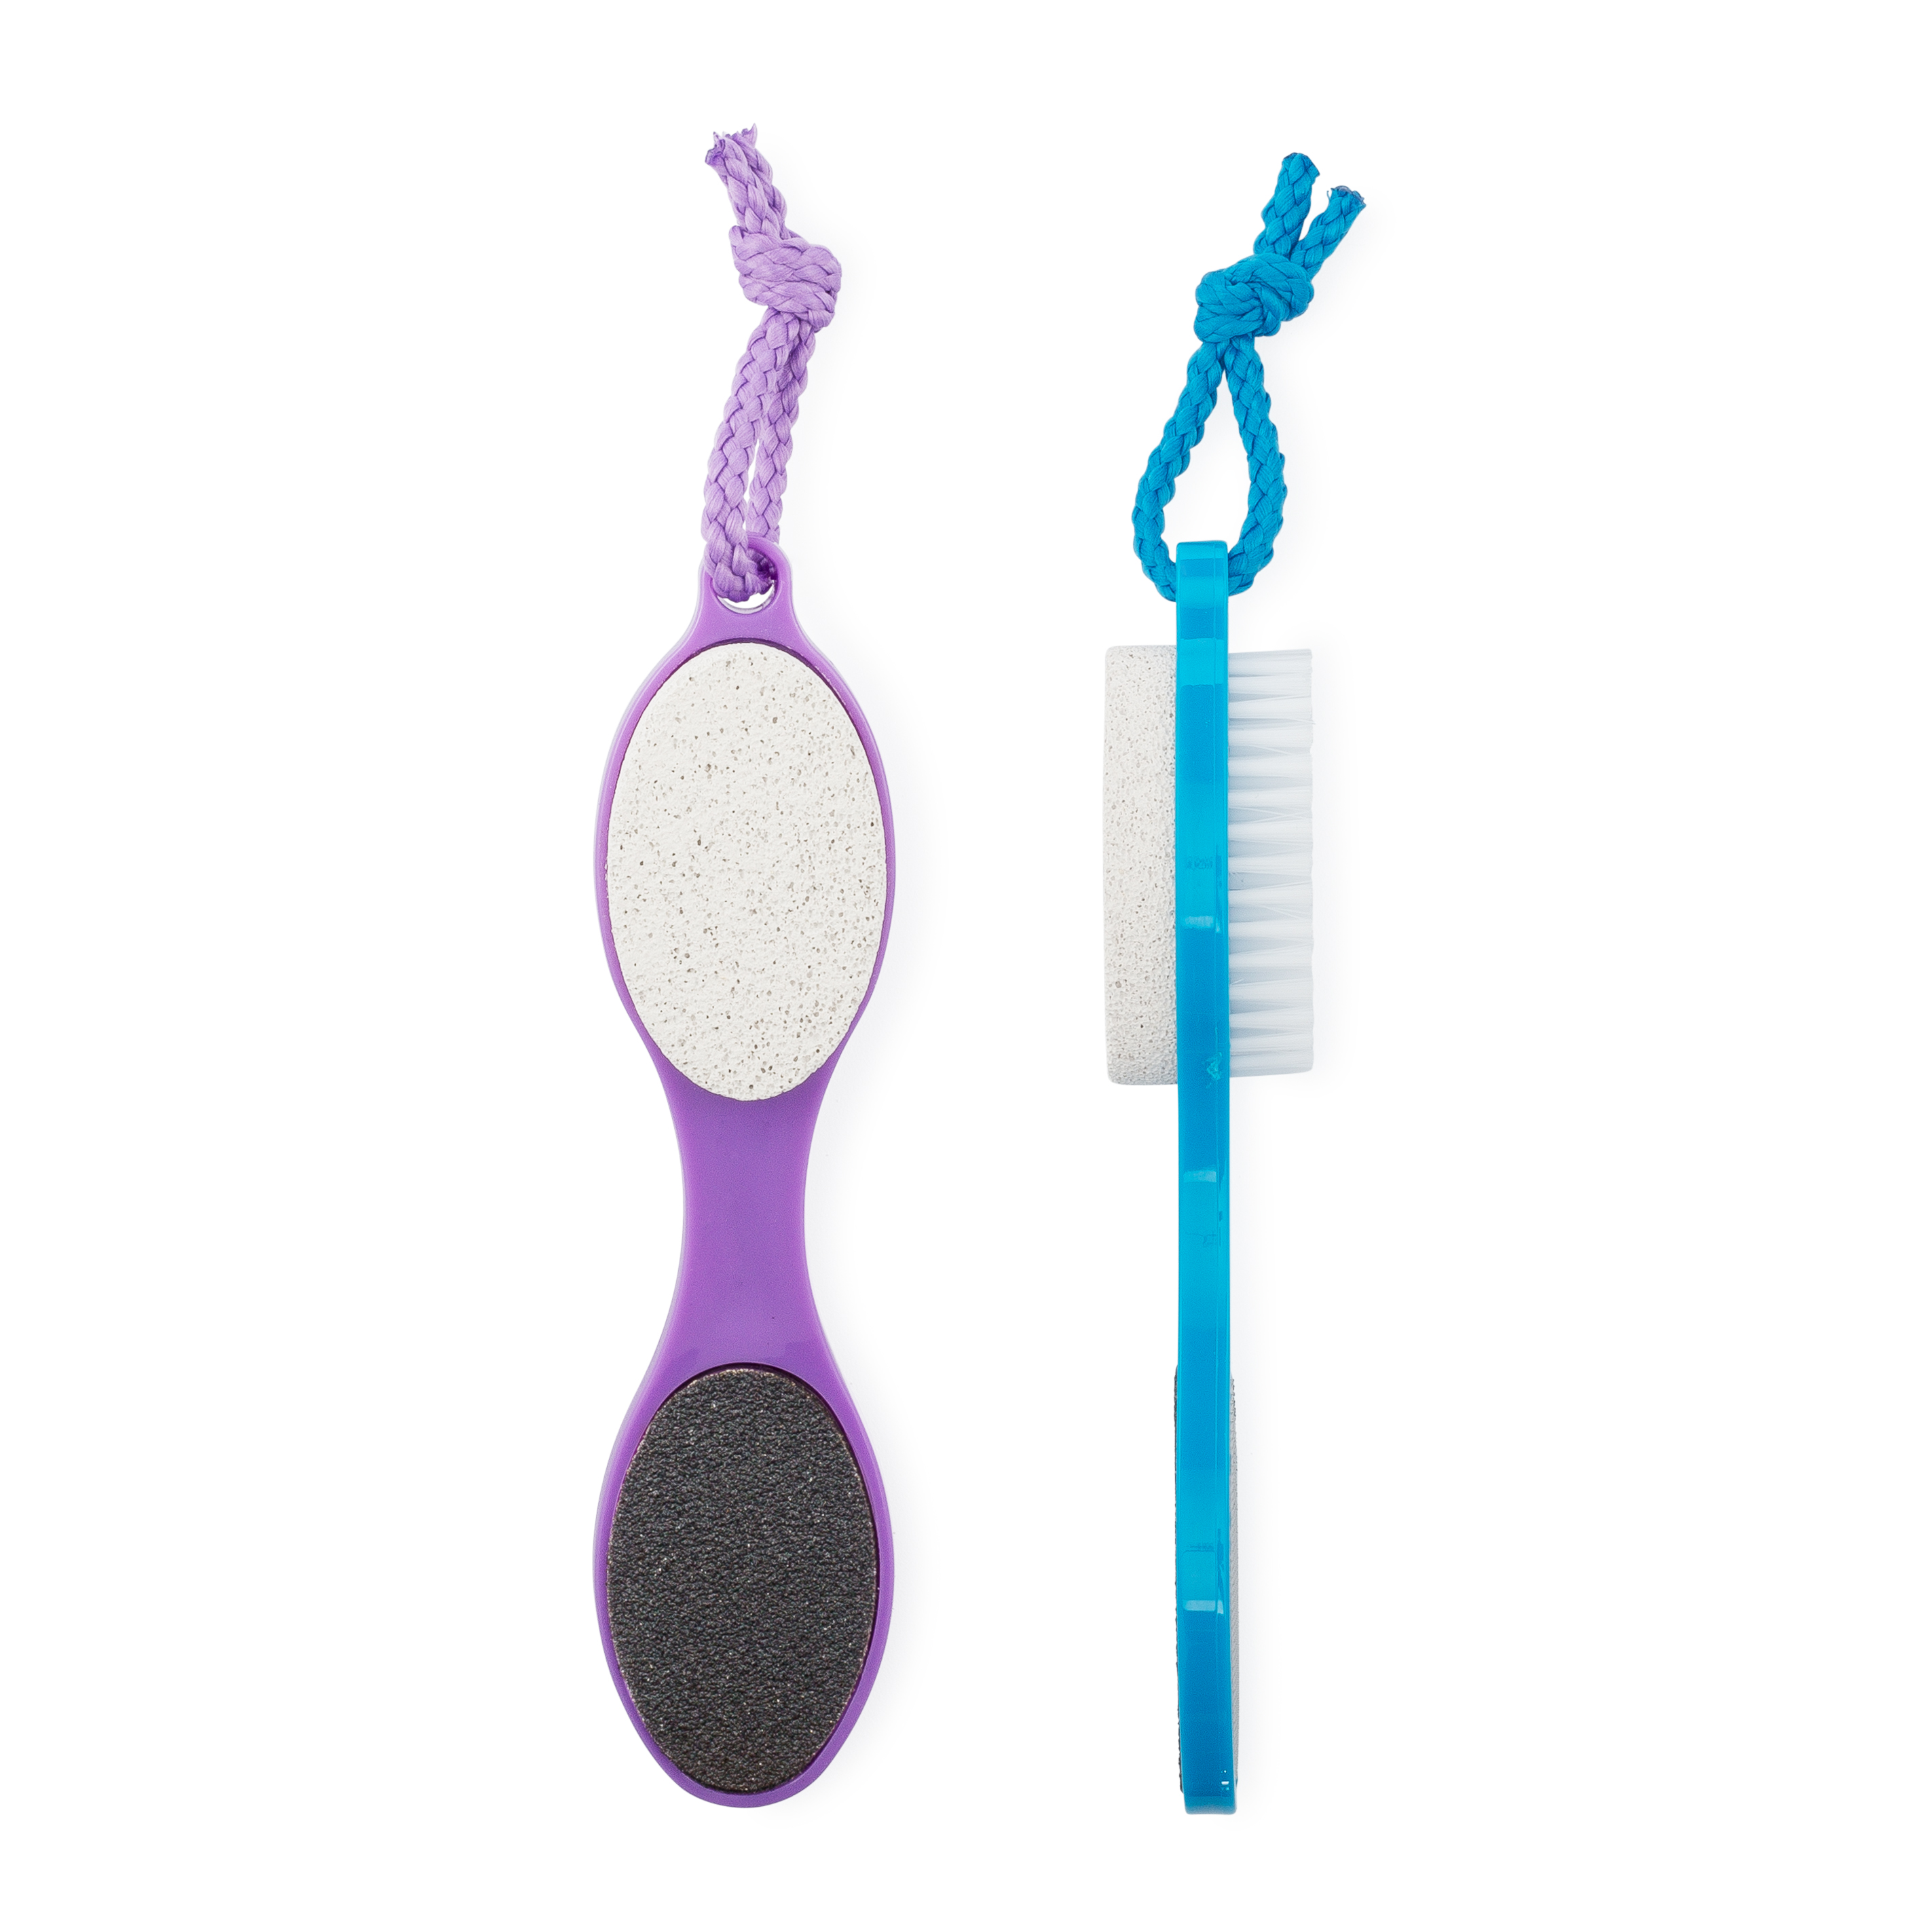 4-in-1 Foot Wand - Color May Vary - image 5 of 5